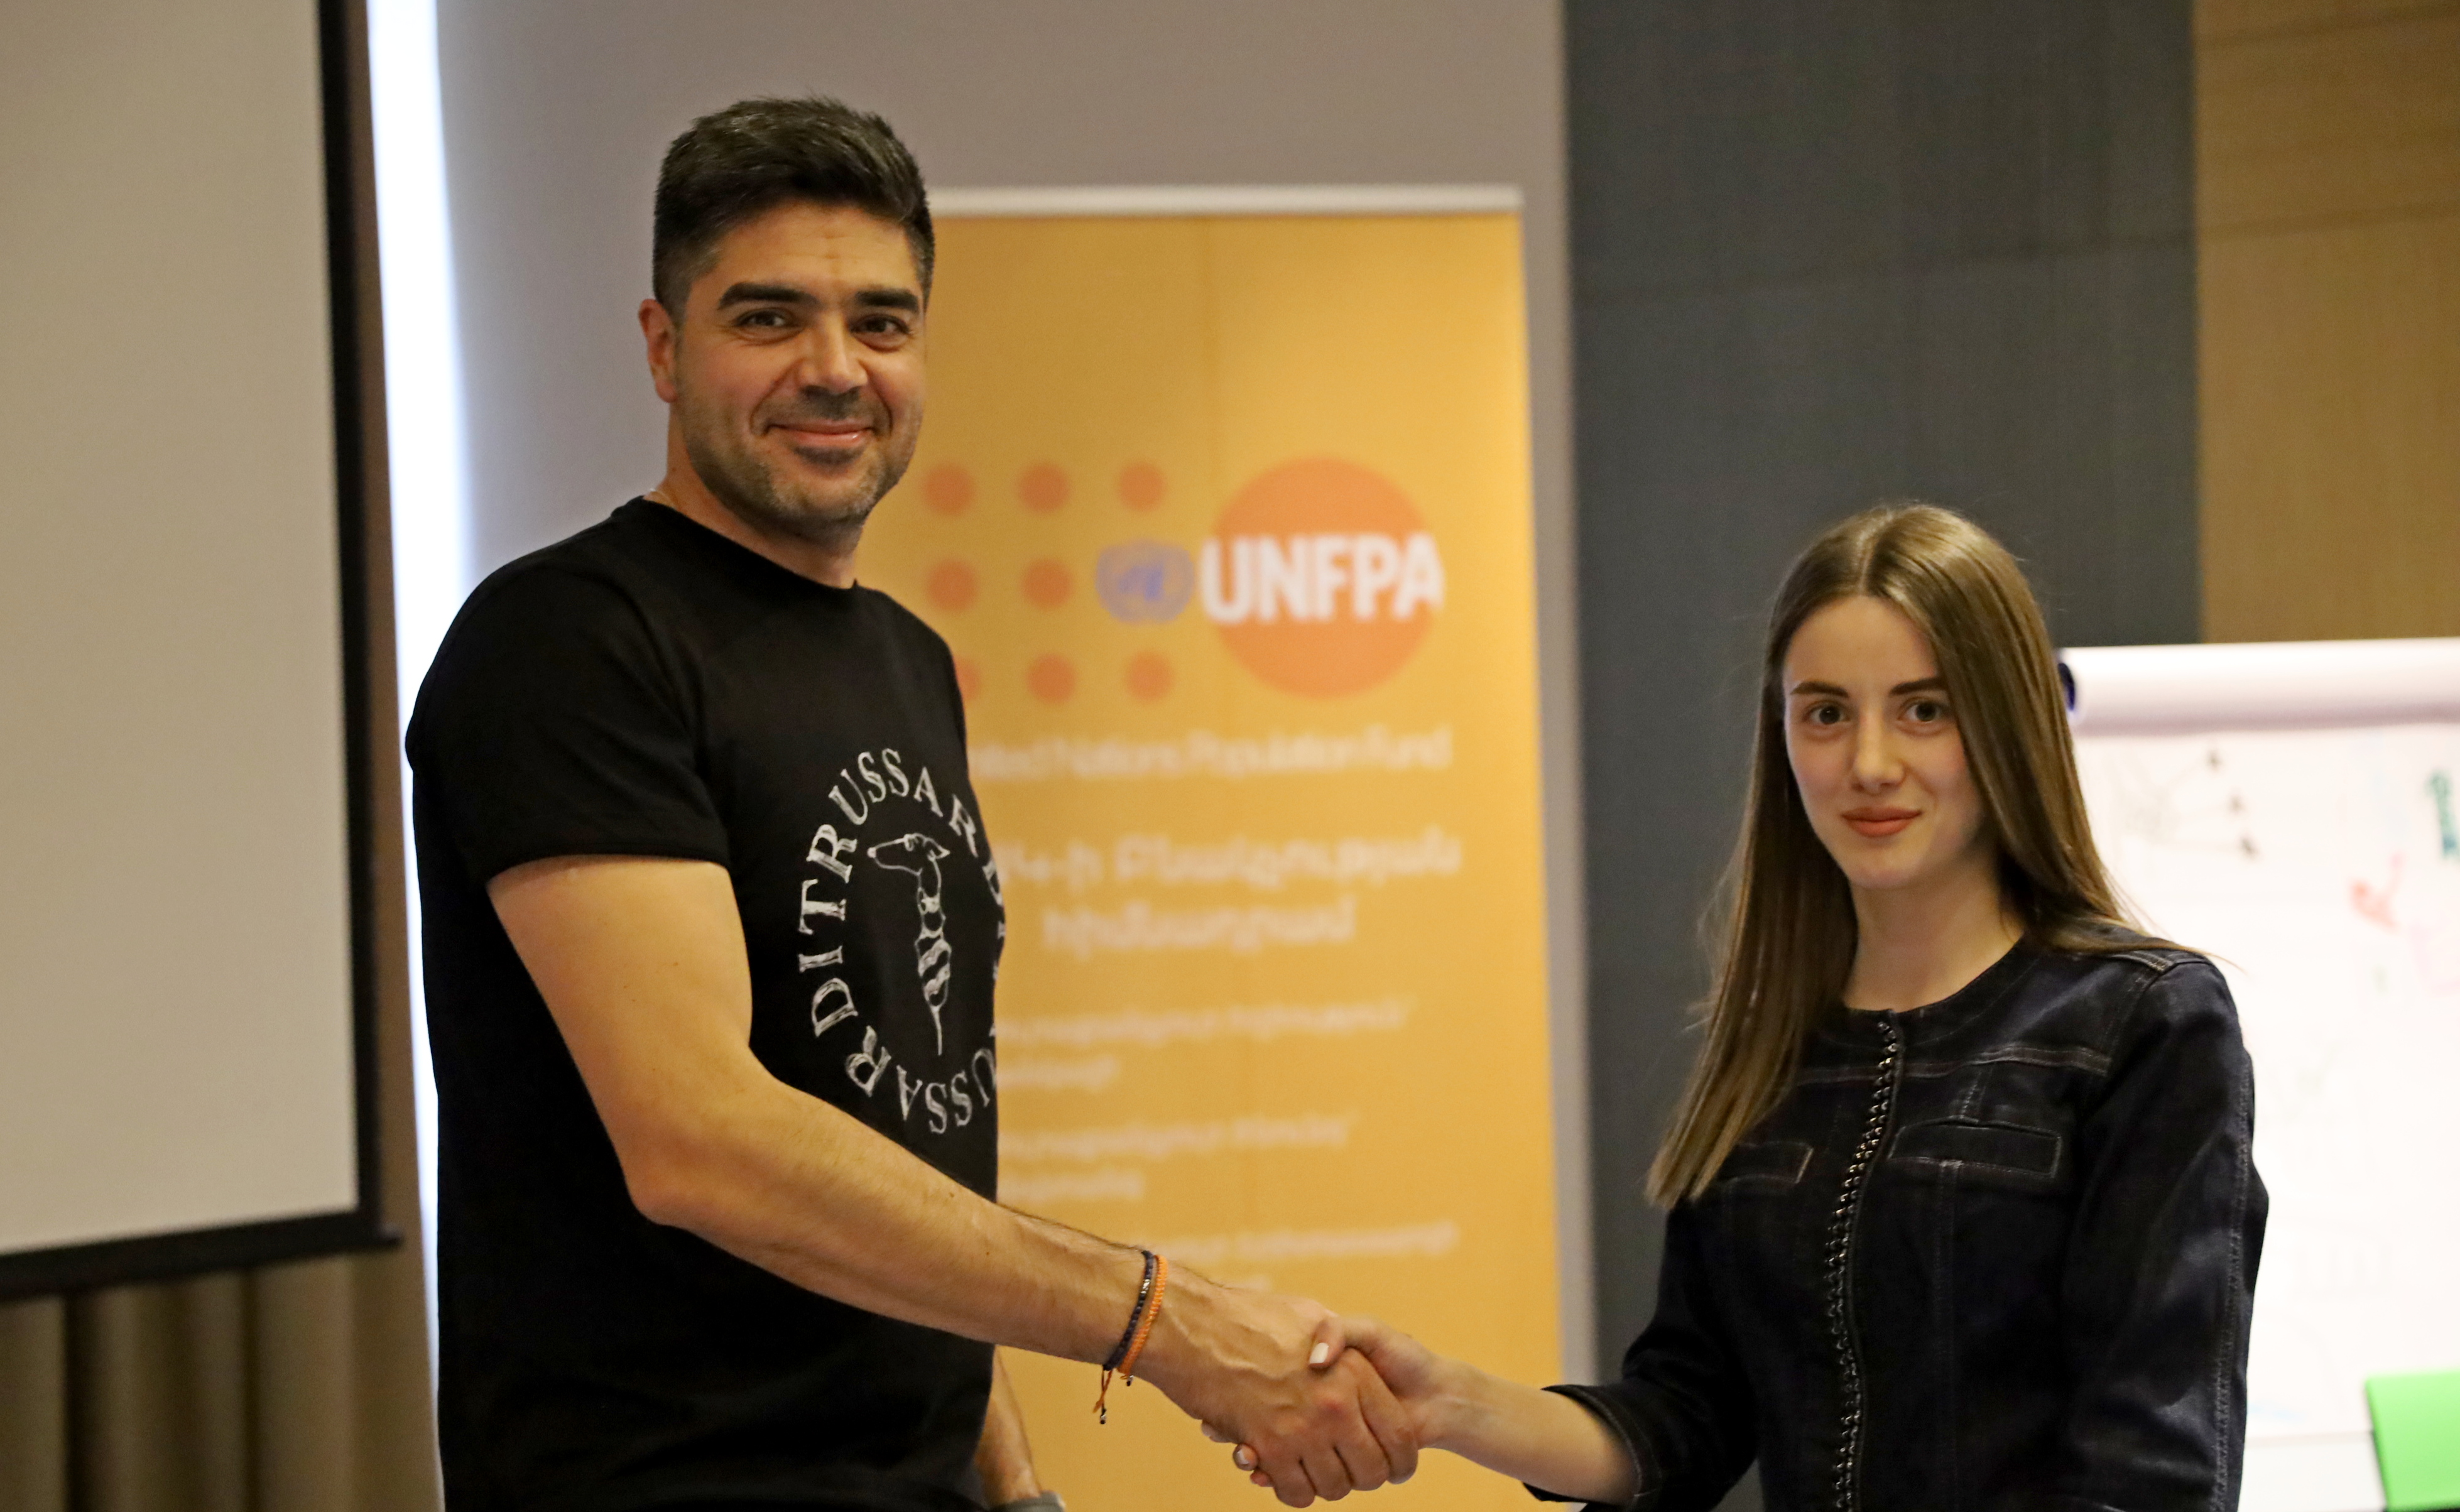 Vruyr Grigoryan hands over a certificate to the workshop participant.